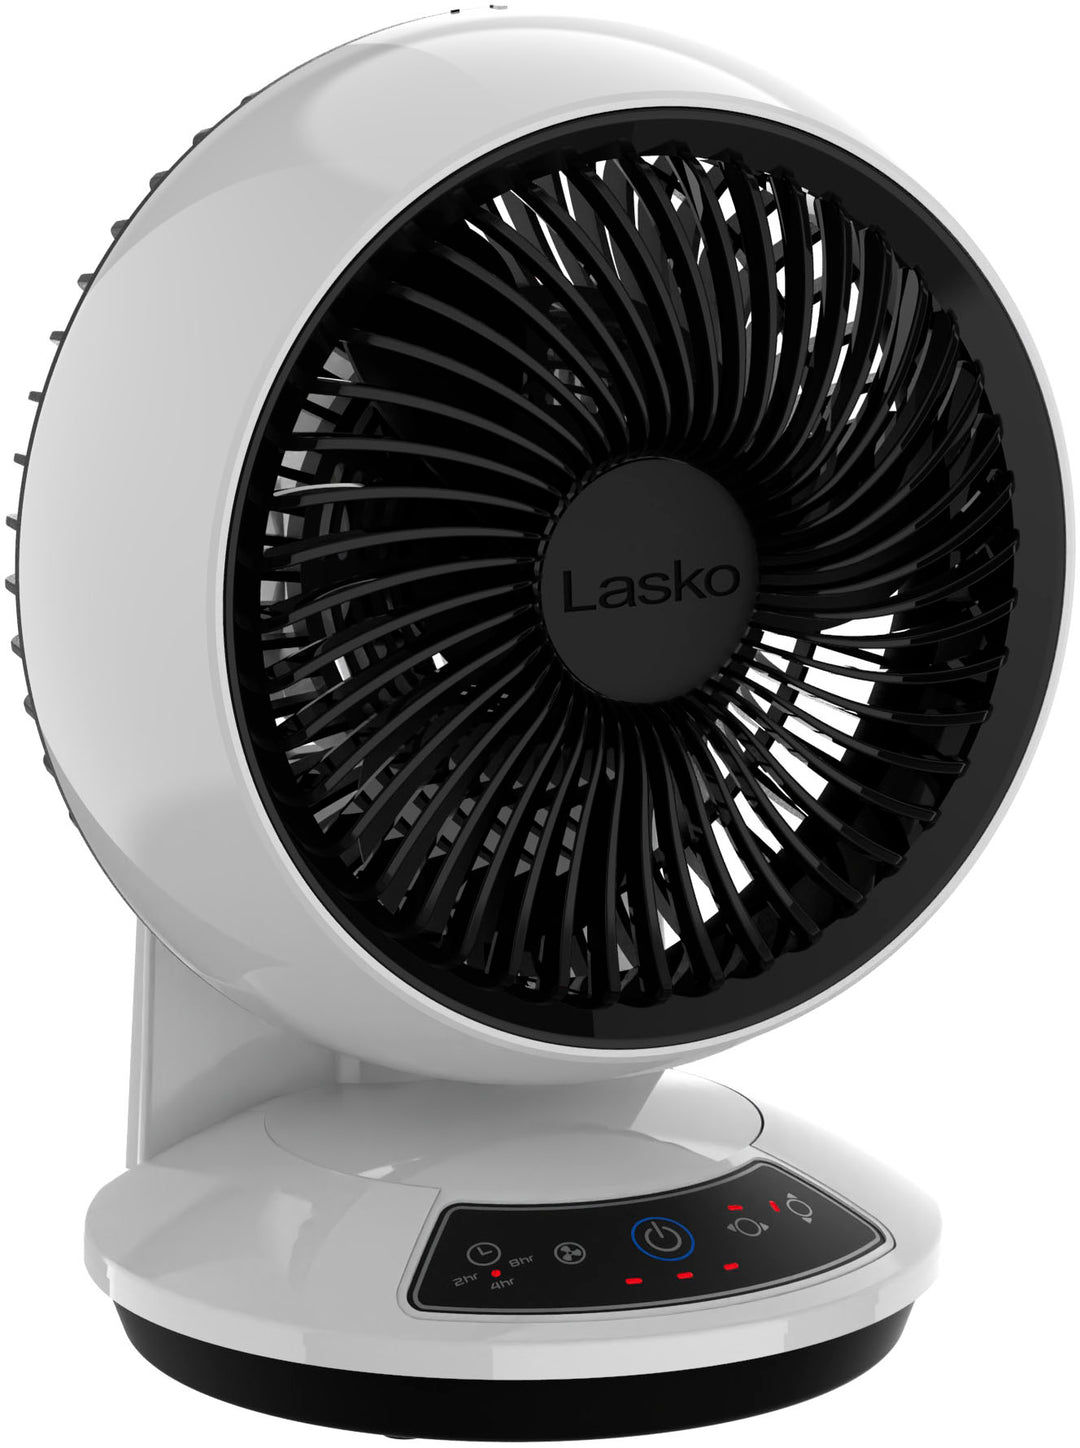 Lasko Whirlwind Orbital Motion Air Circulator Fan with Timer and Remote Control - White_2